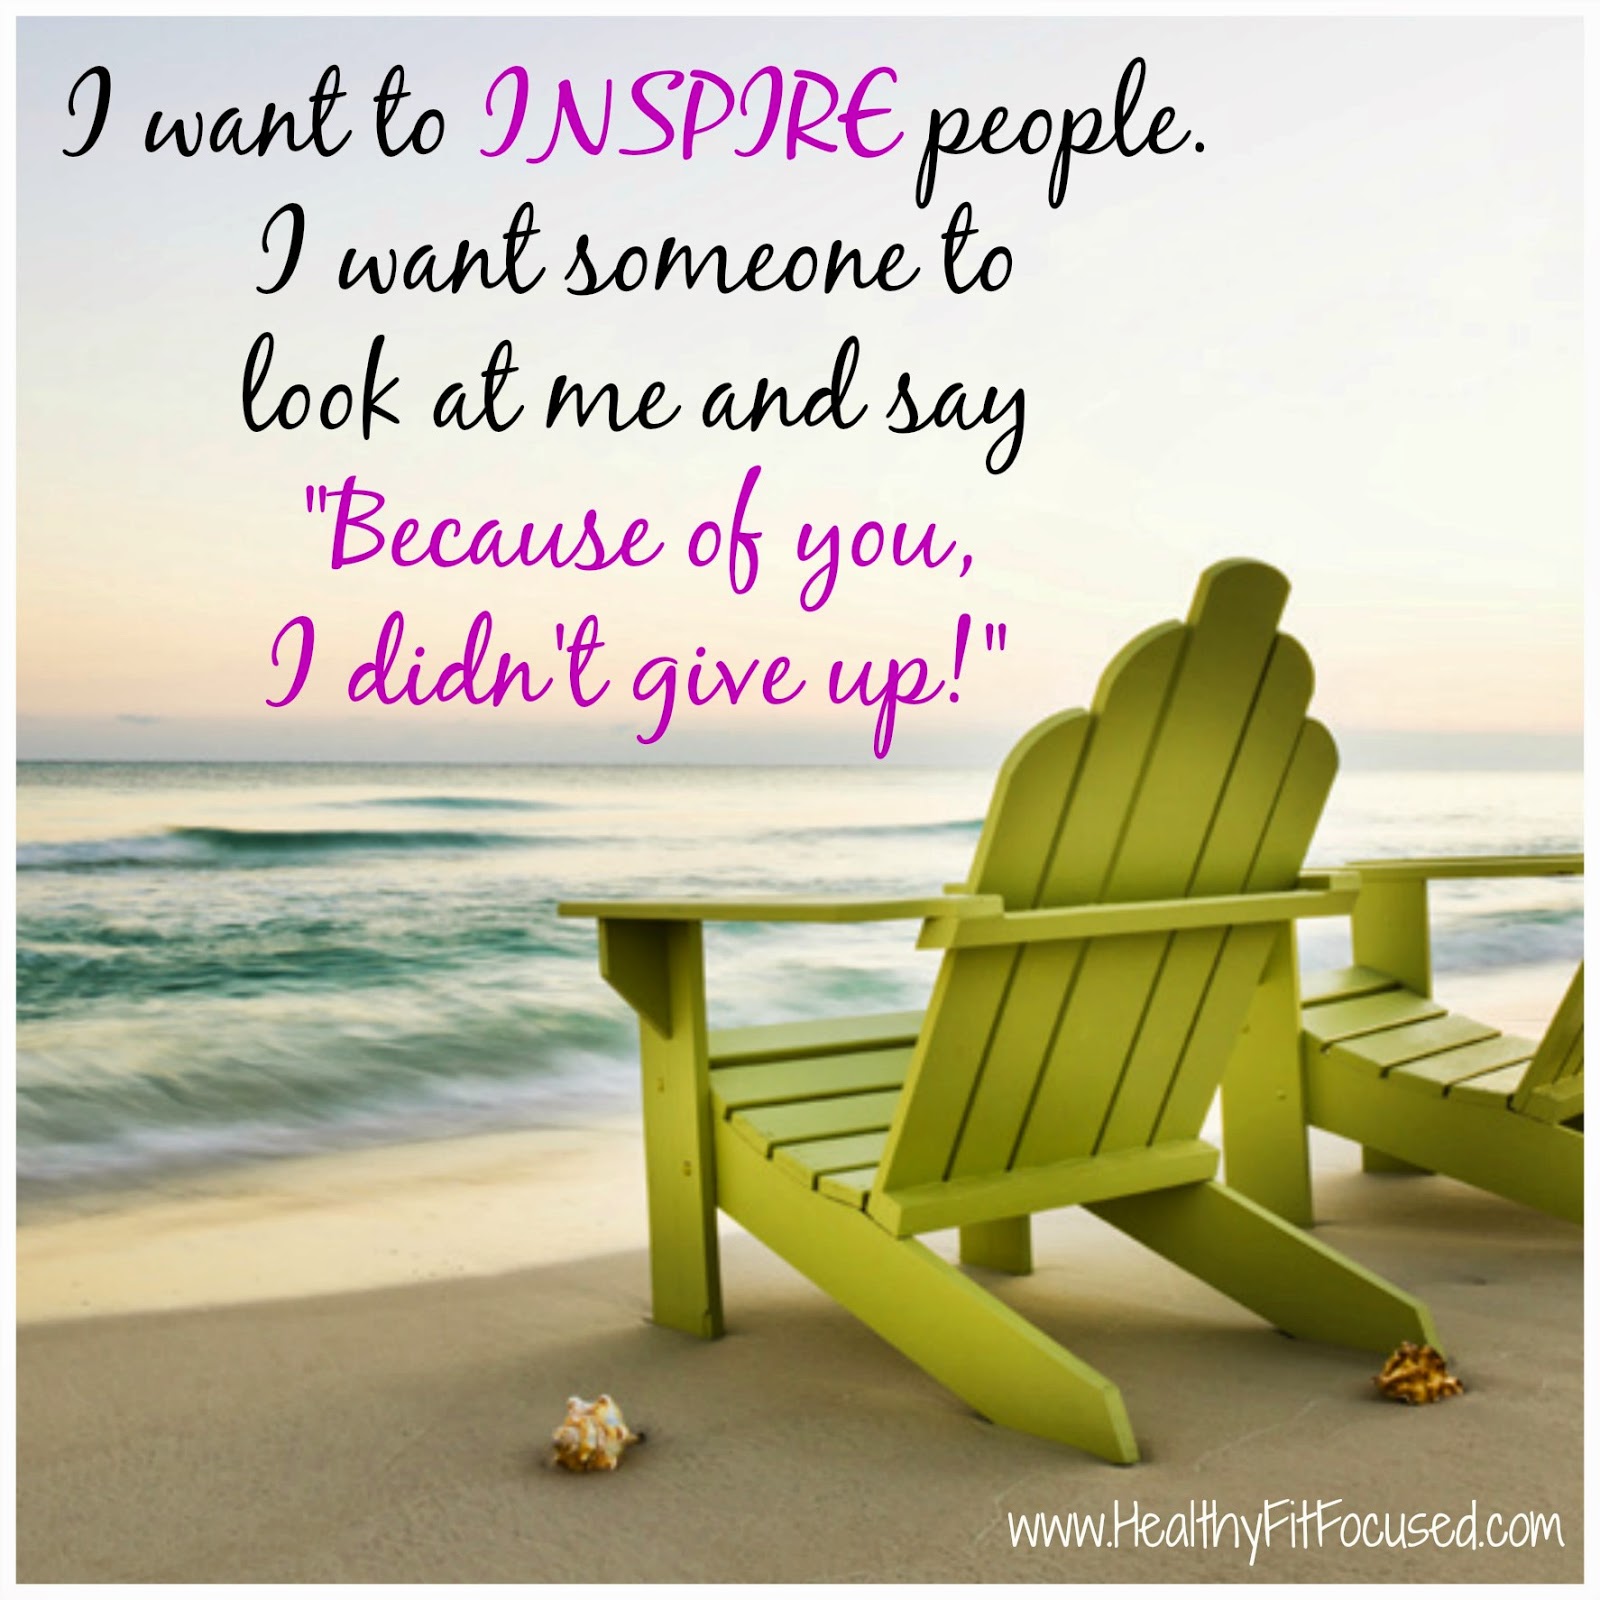 Beachbody Coaching, Mentor, Accountability, Change lives, I want to inspire others